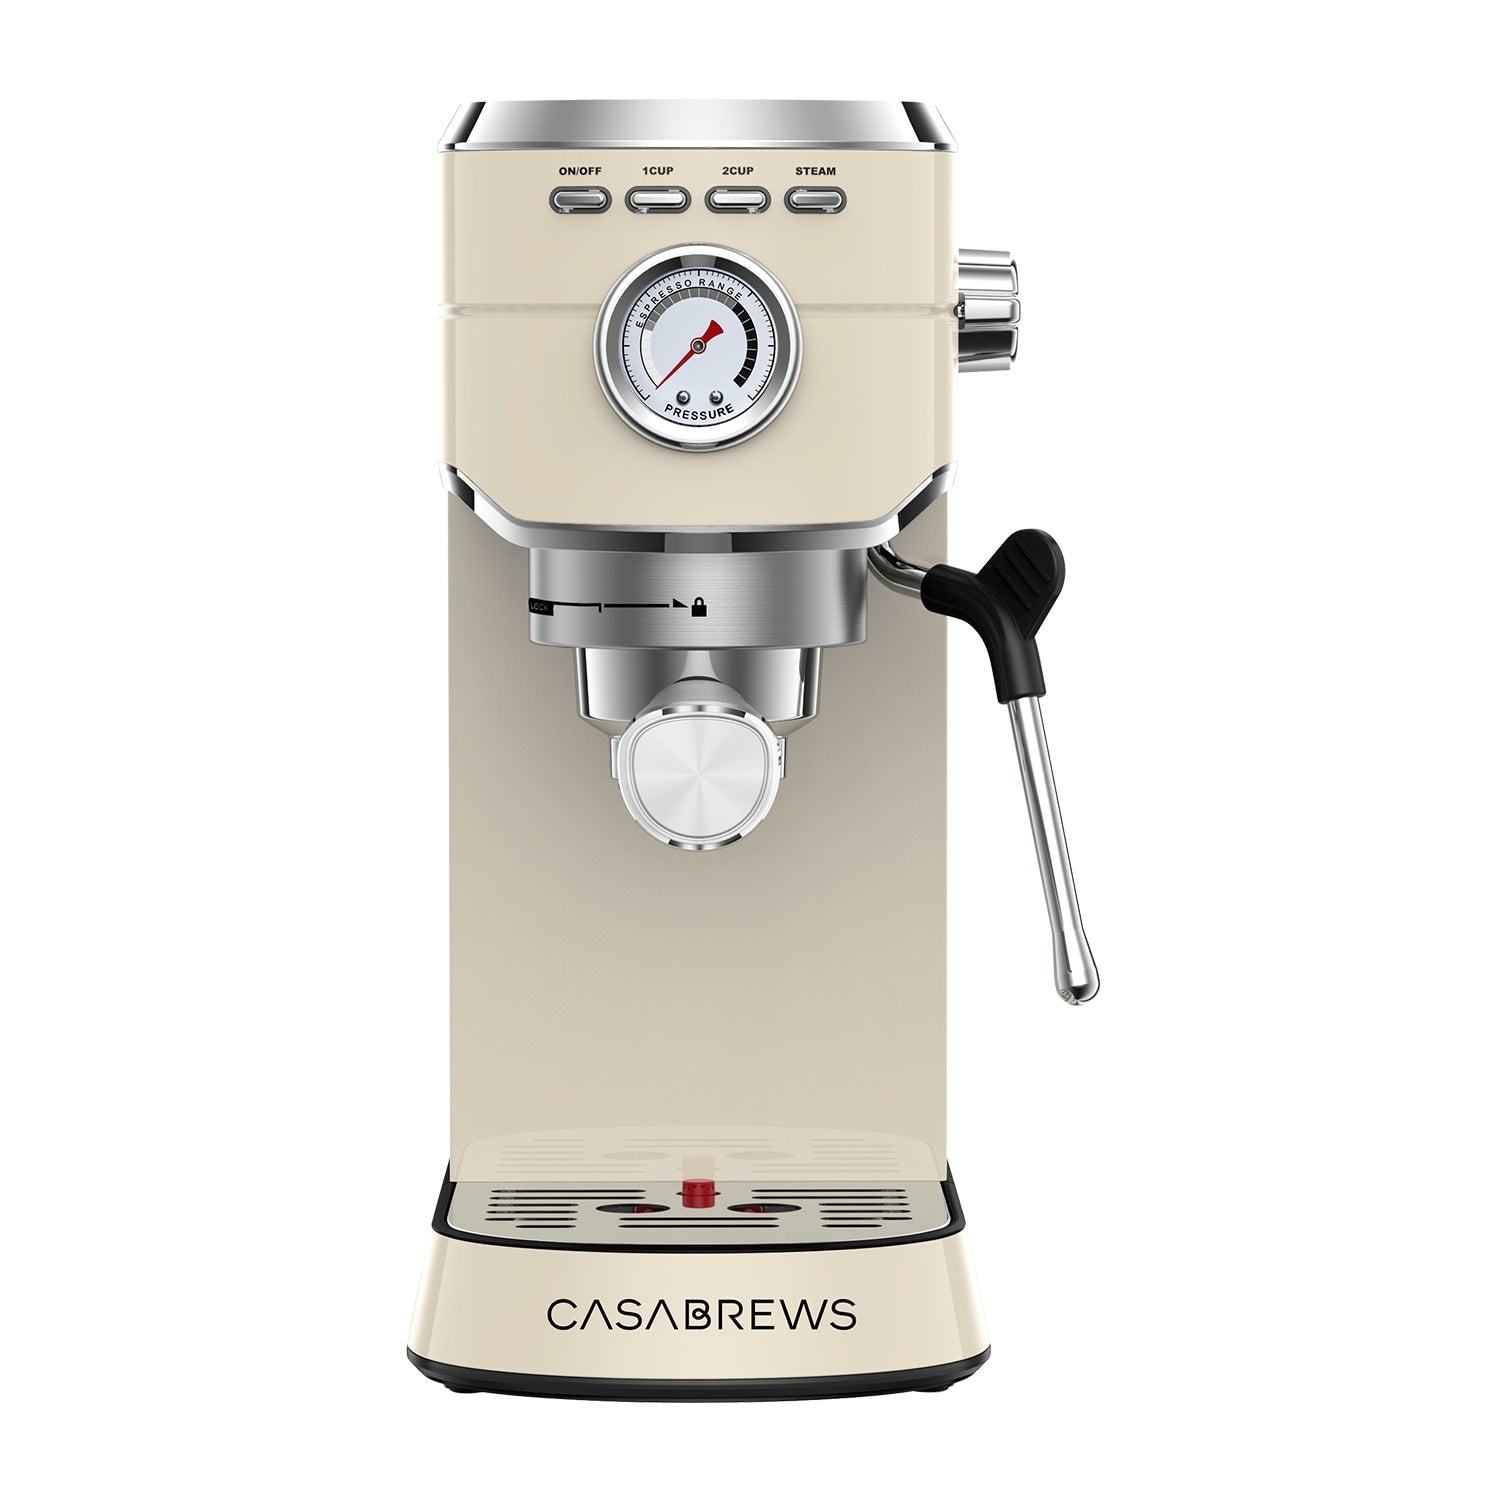 CASABREWS Compact 20 Bar Espresso Machine with 34oz Removable Water Tank Beige